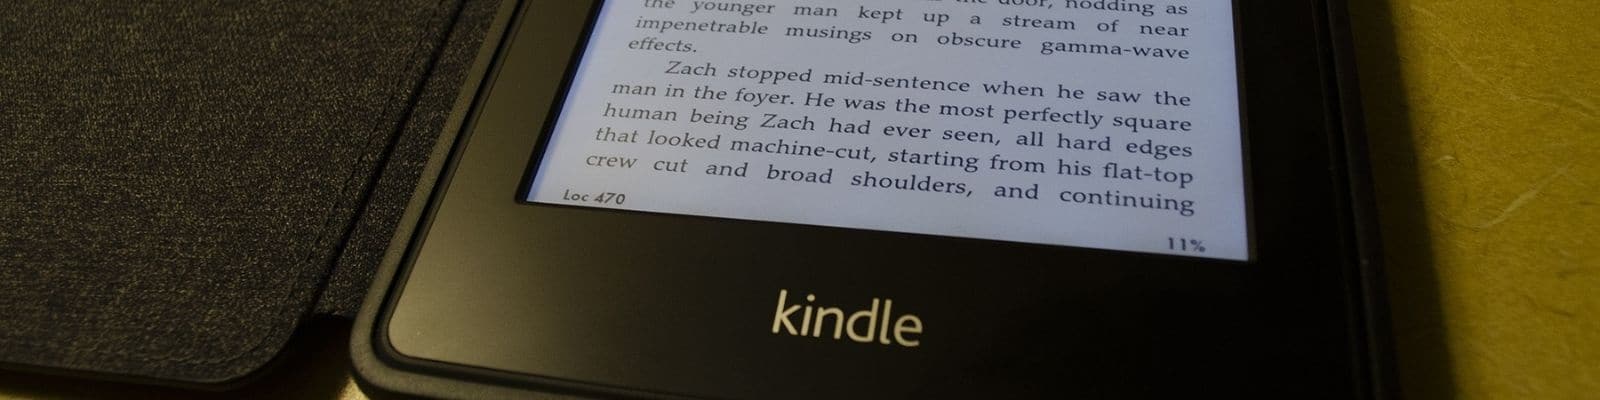 Amazon Kindle Direct Publishing: What You Need to Know. Guide to Amazon KDP